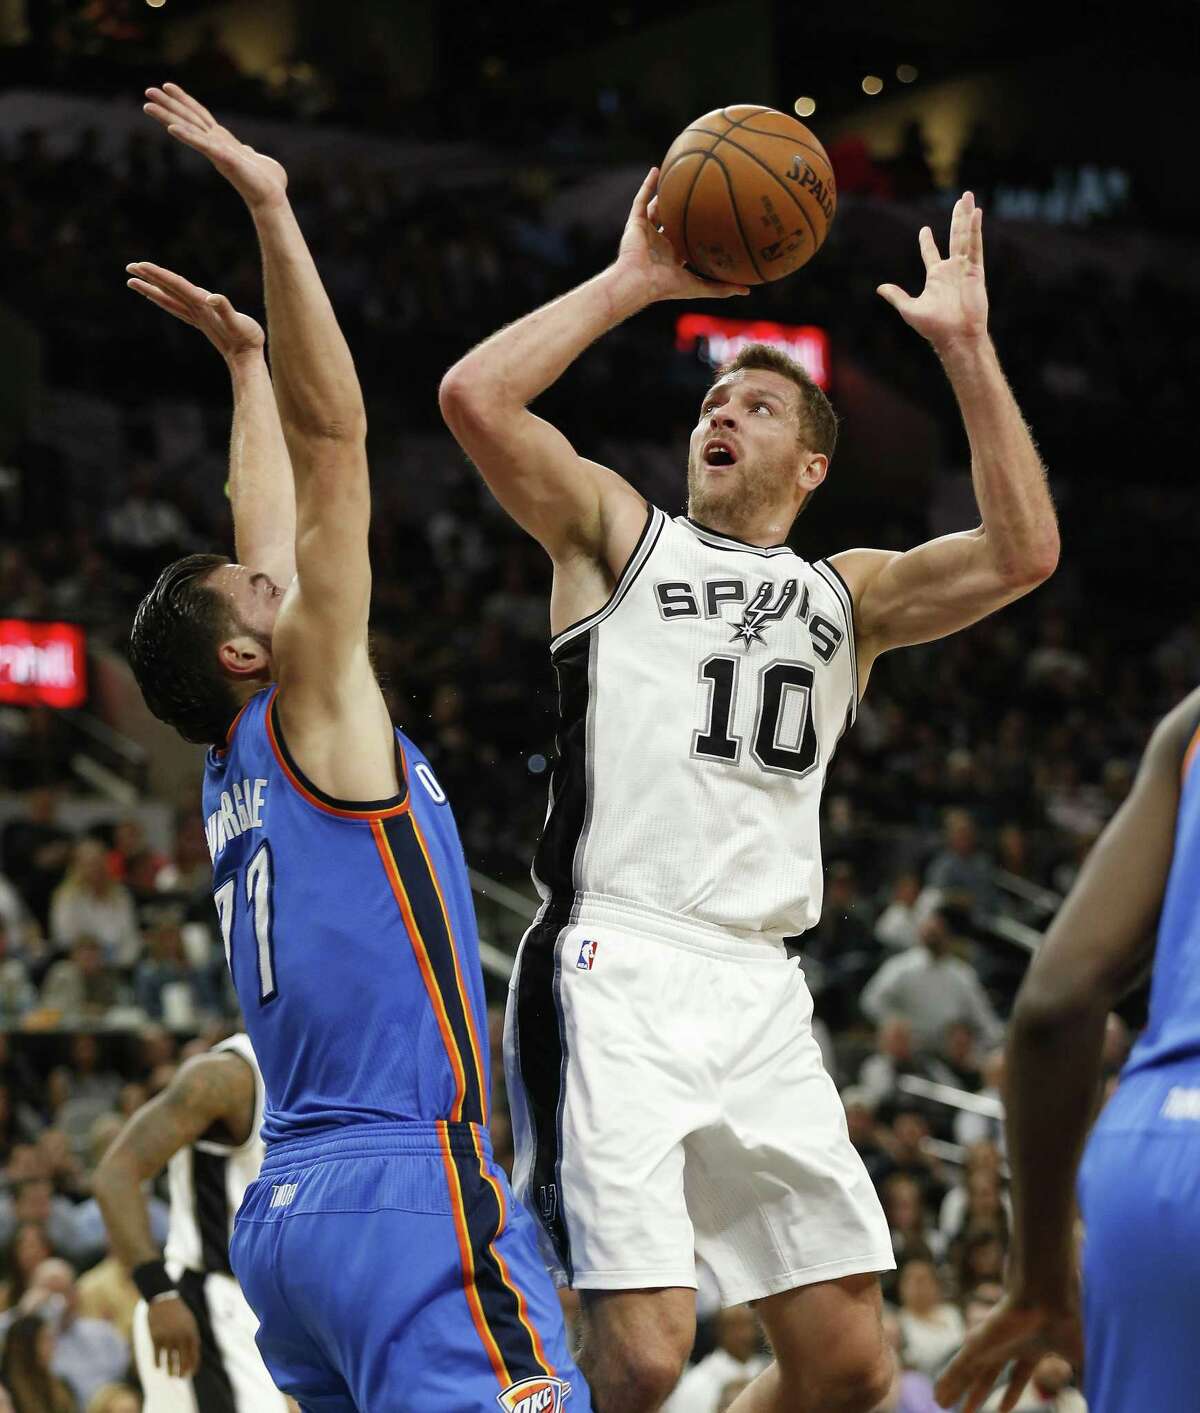 Spurs' David Lee (10) attempts a shot against Oklahoma City Thunders' Joffrey Lauvergne (77) during their game at the AT&T Center on Tuesday, Jan. 31, 2017. (Kin Man Hui/San Antonio Express-News)